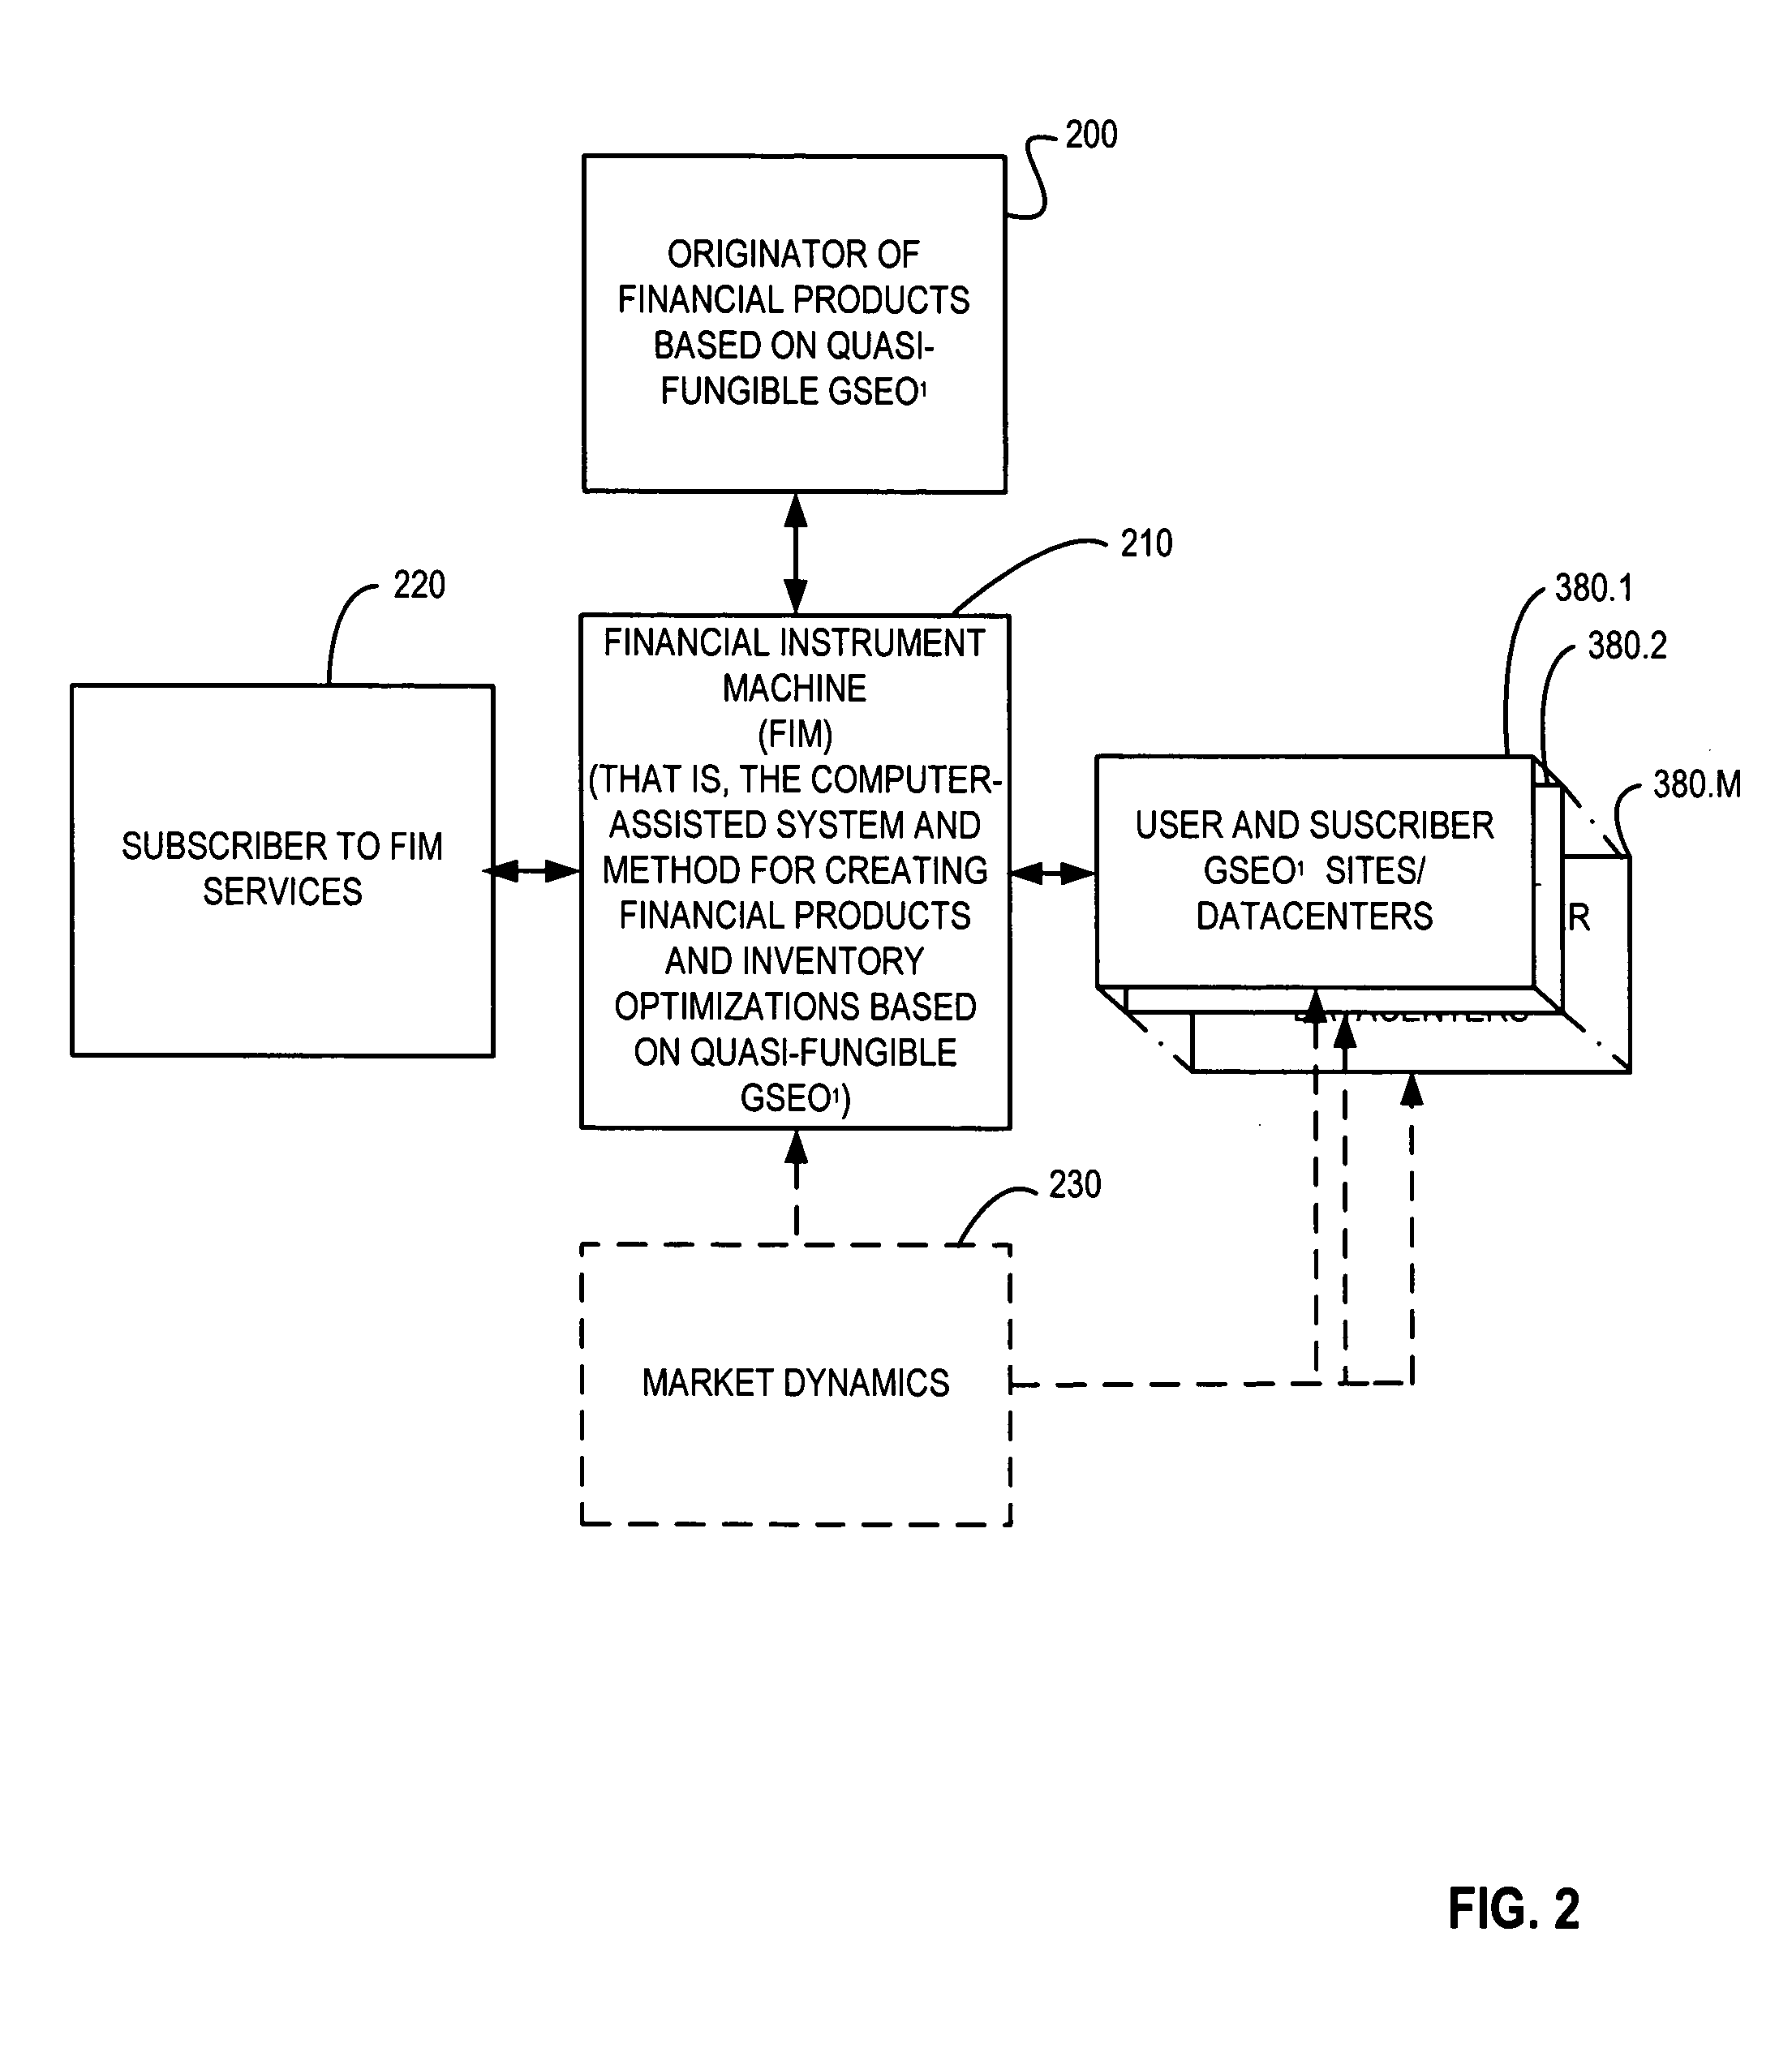 System and method for identification of quasi-fungible goods and services, and financial instruments based thereon